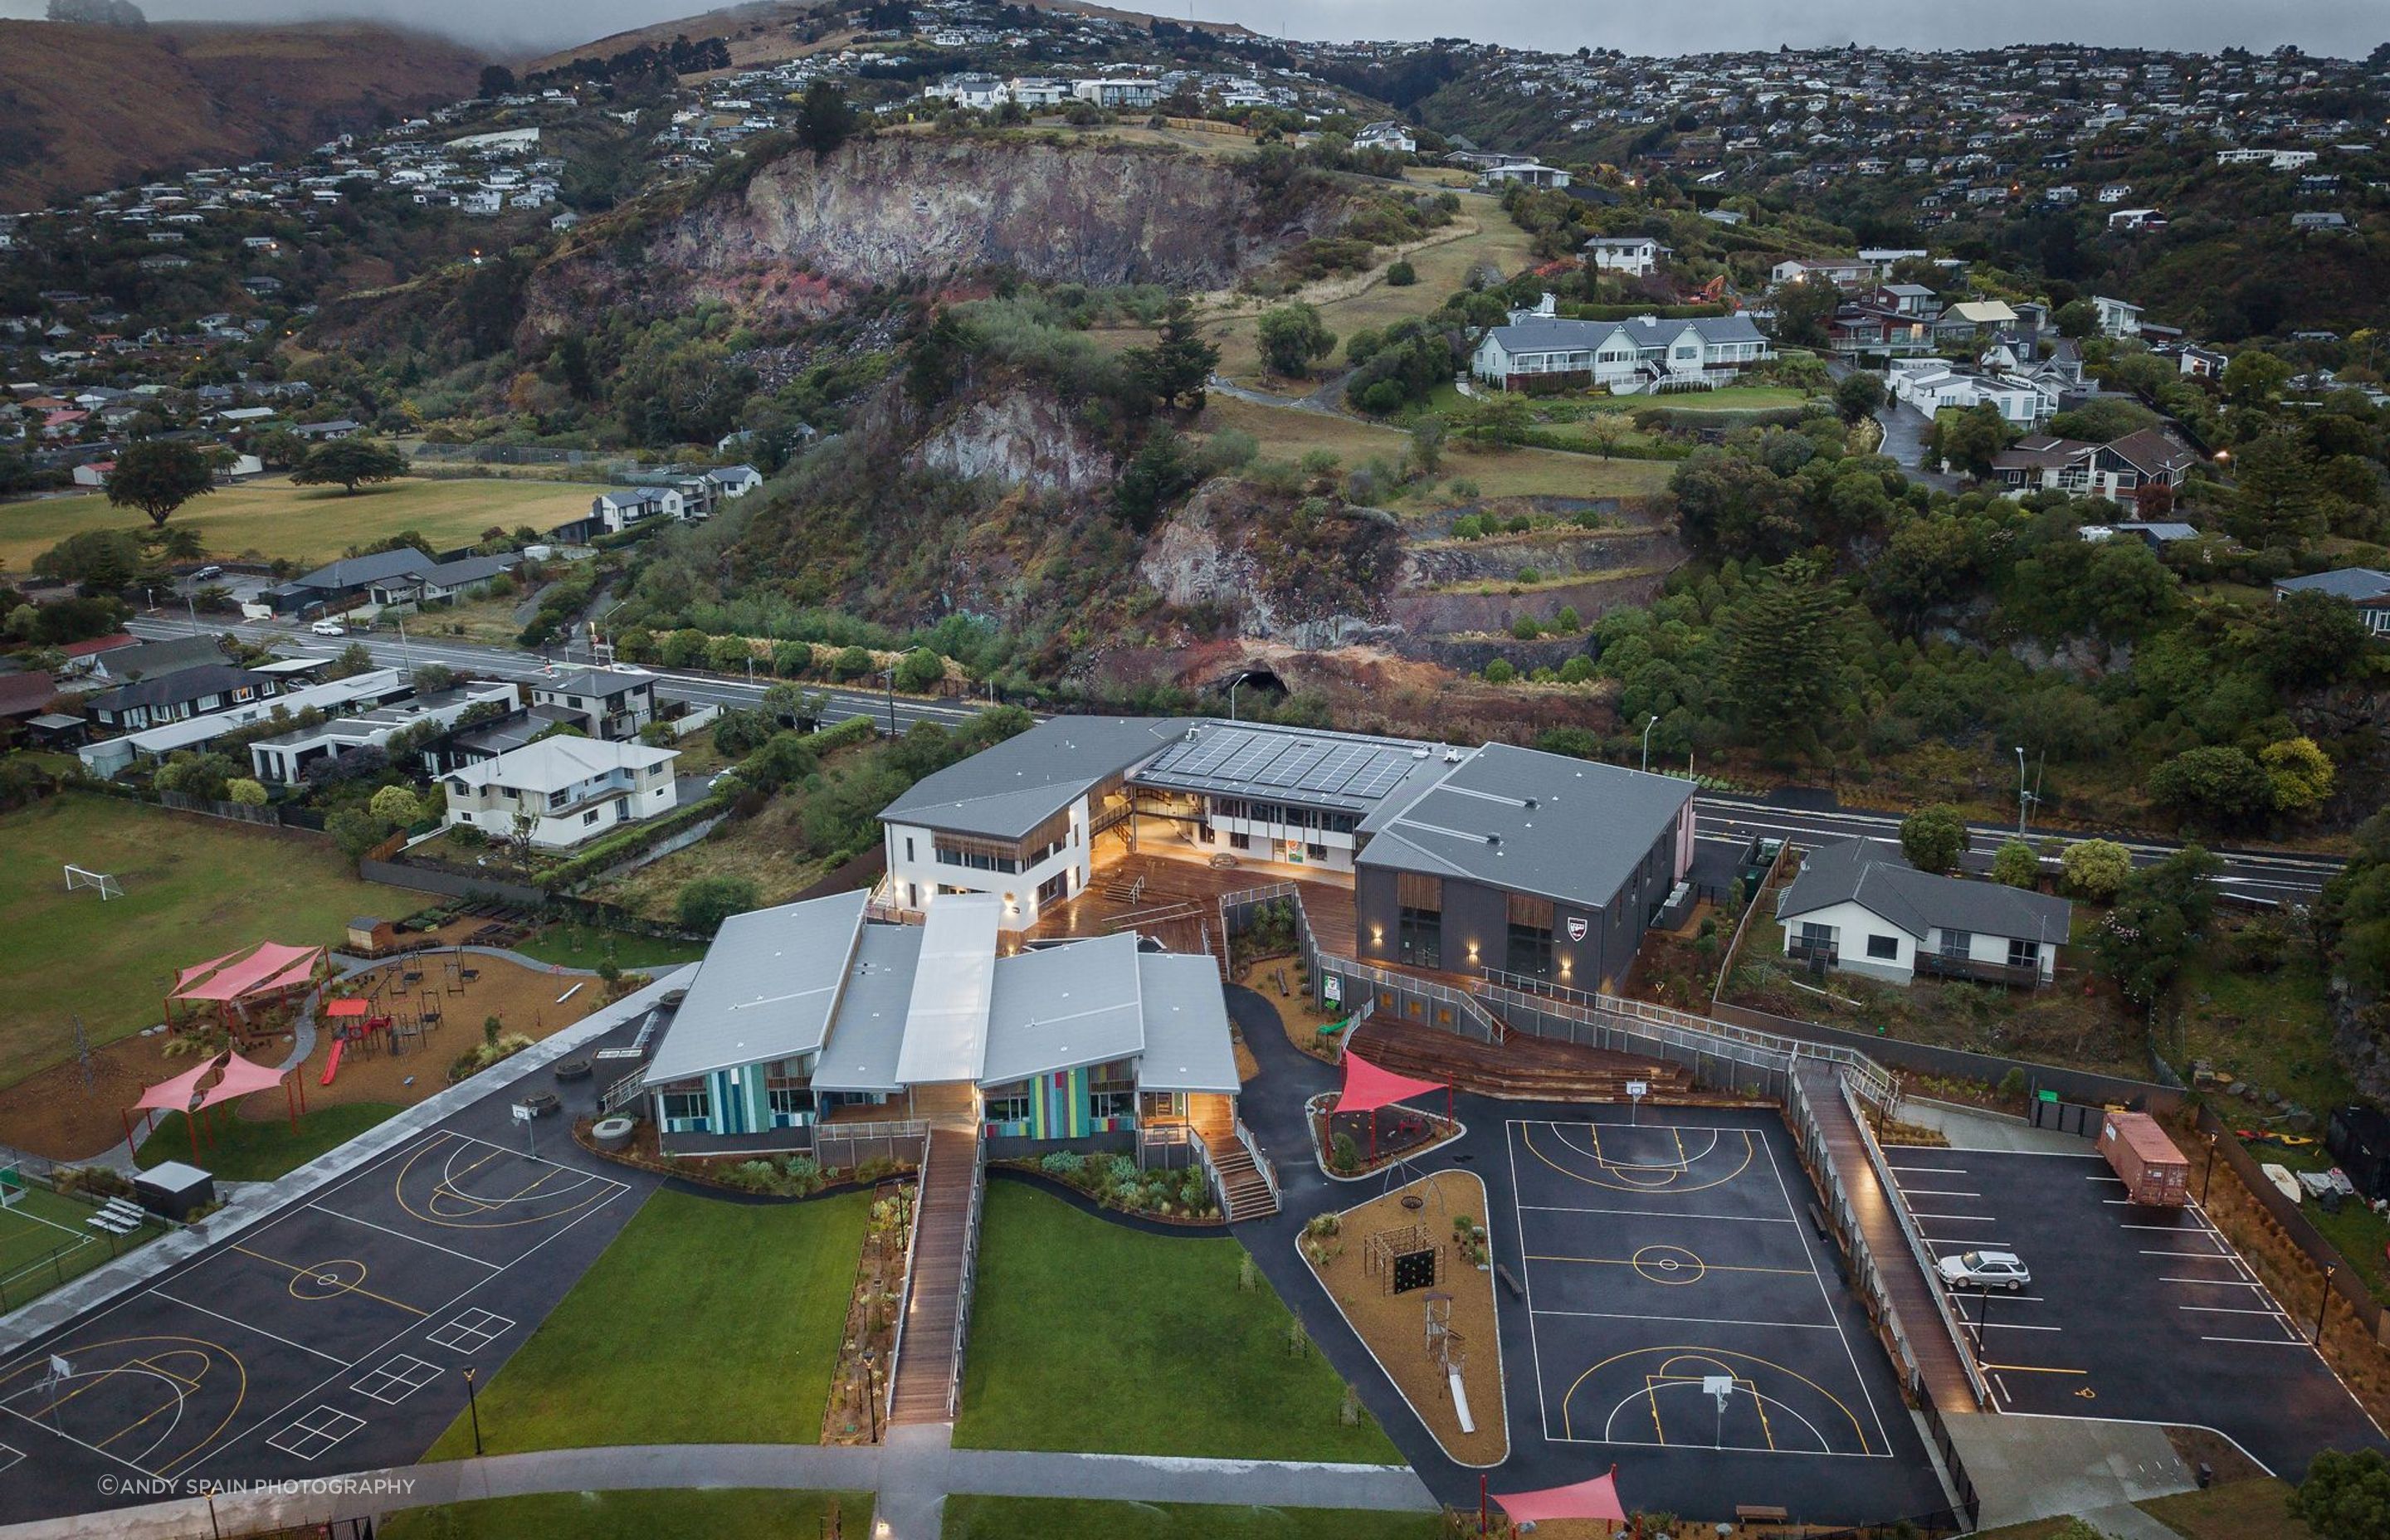 After nine years in the wilderness, Te Raekura Redcliffs School has returned to the Redcliffs community is has served for more than a century.